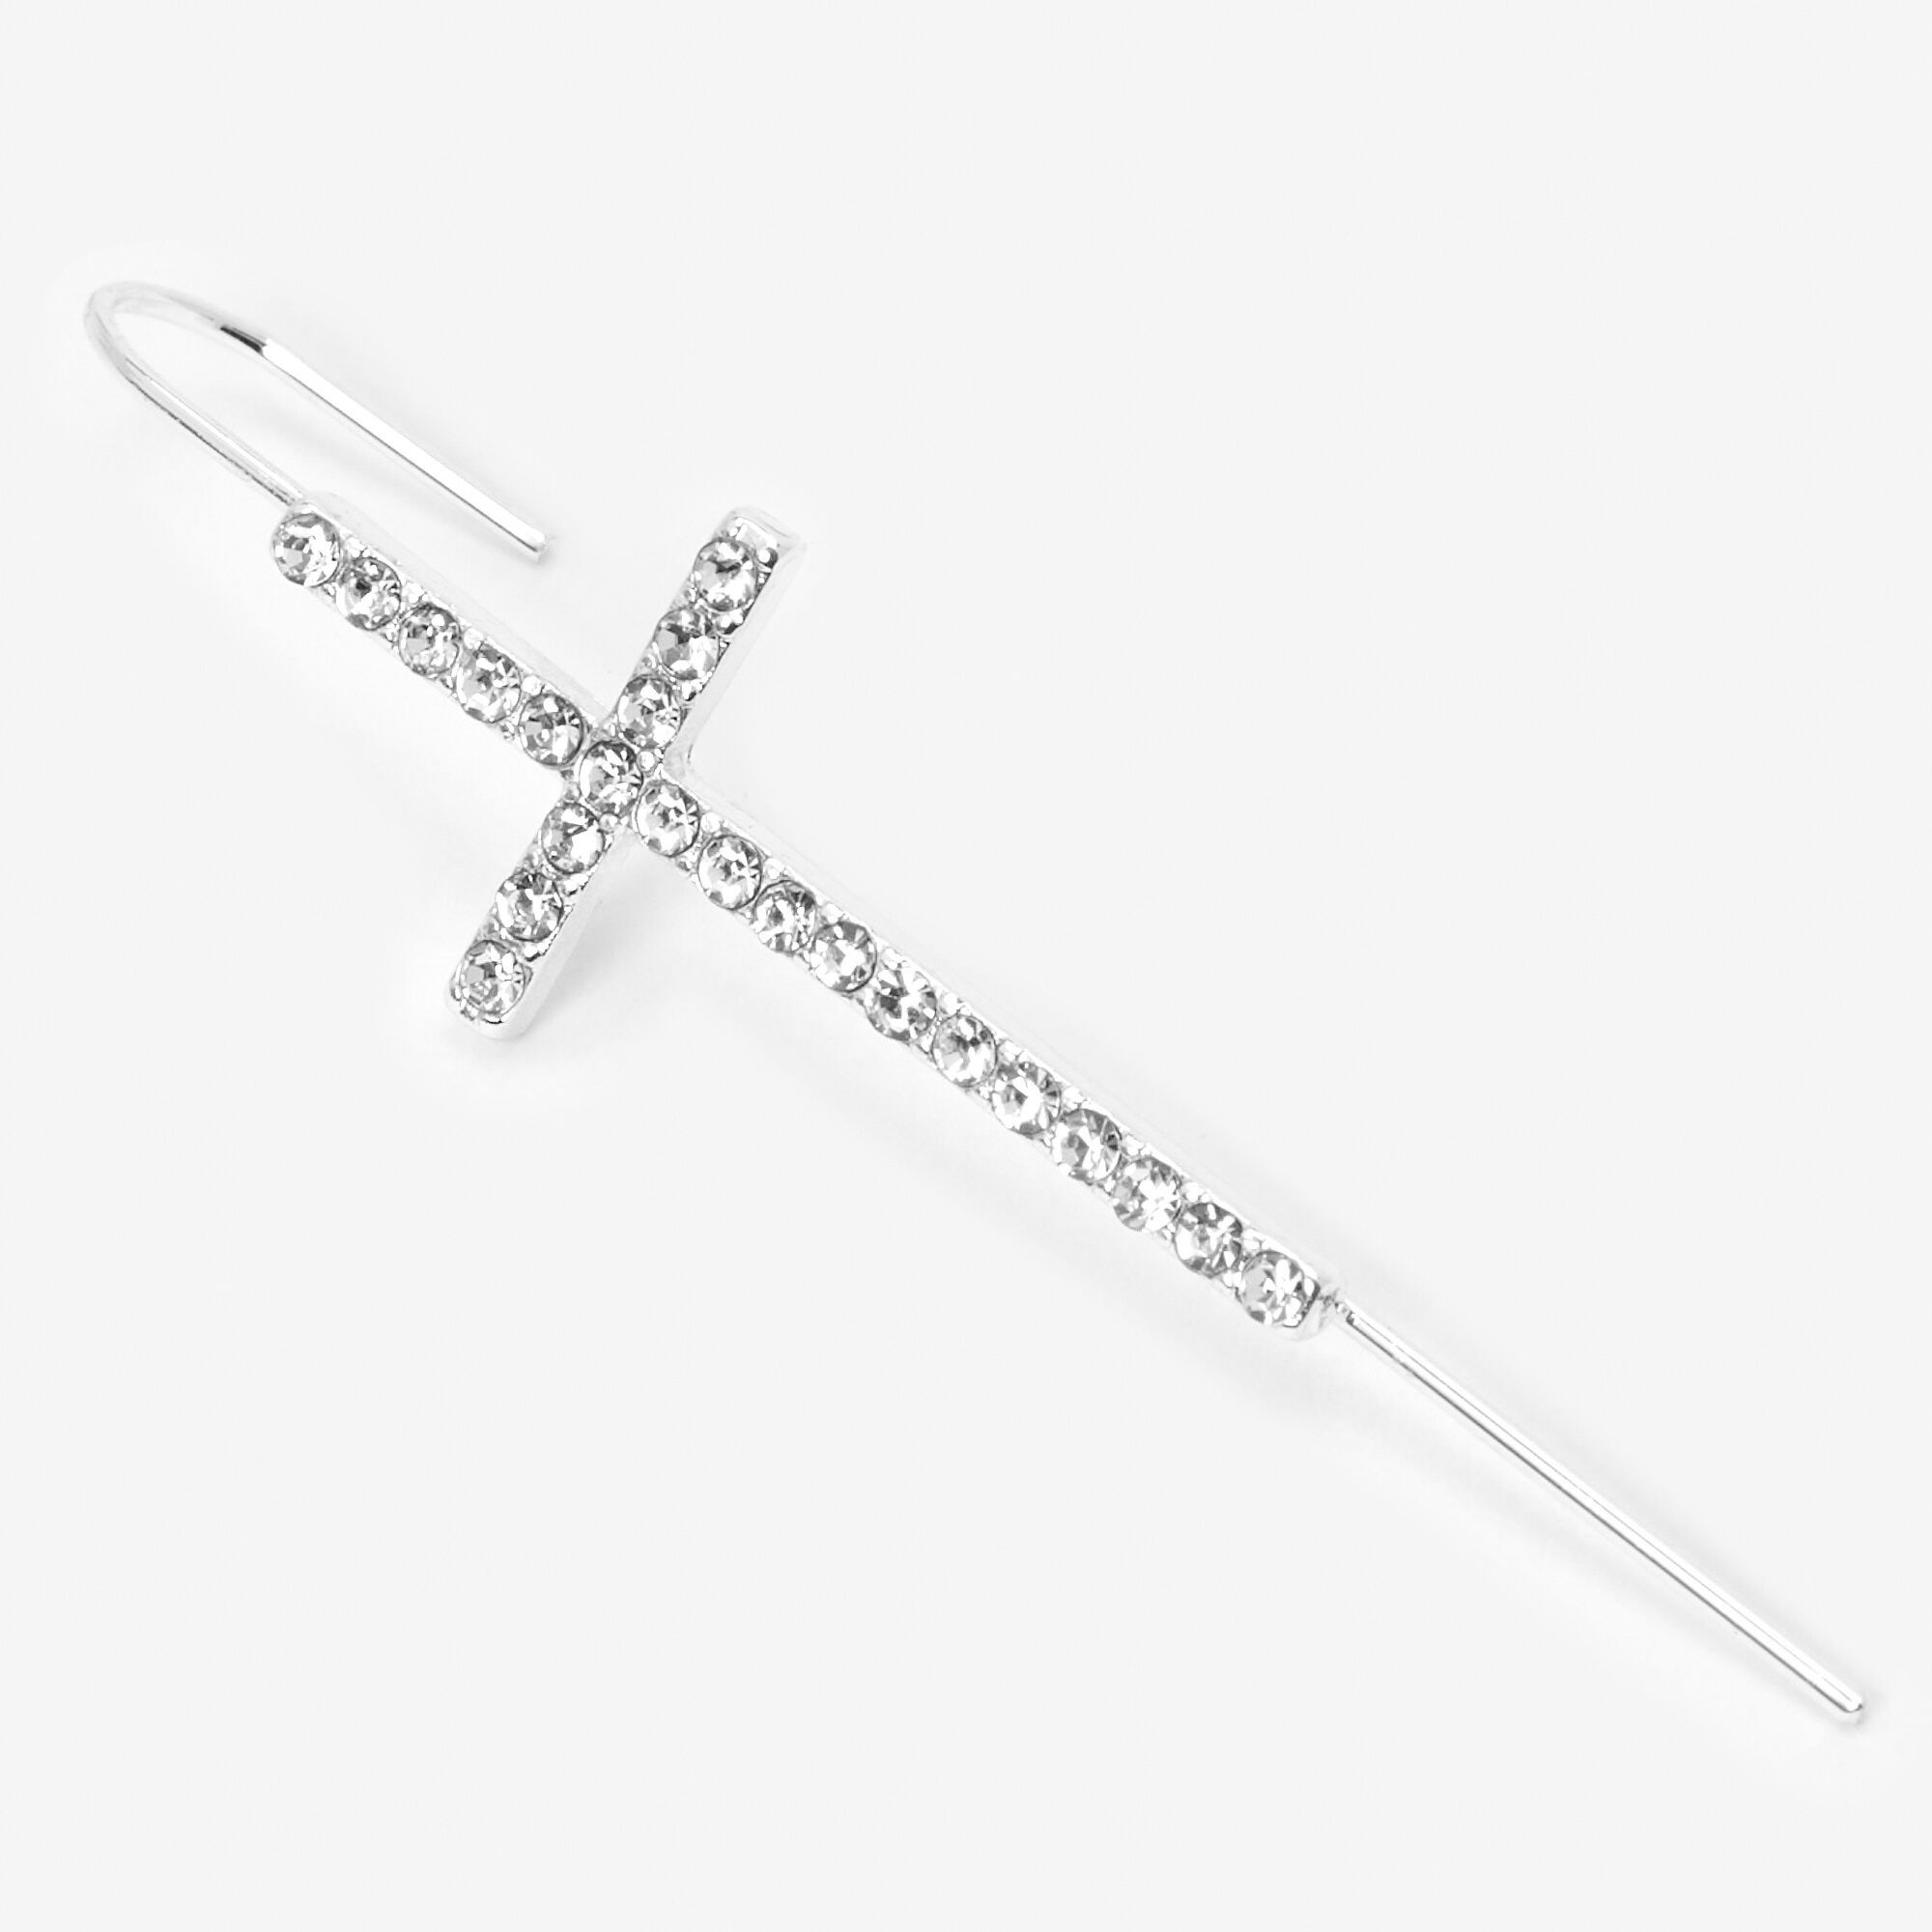 View Claires Tone Embellished Cross Ear Cuff Pin Silver information